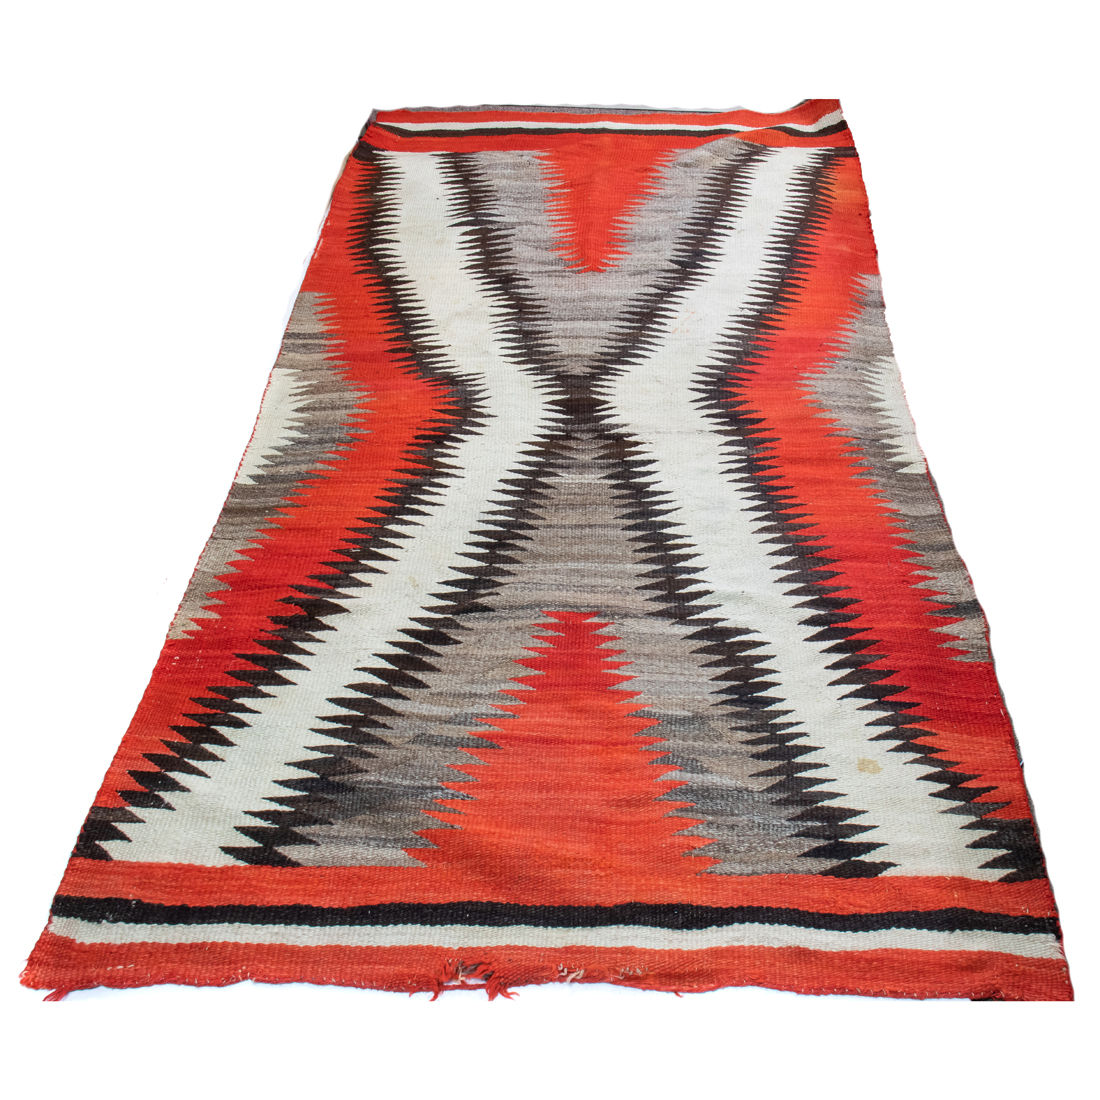 A NAVAJO TRANSITIONAL WEARING BLANKET 2d2f72